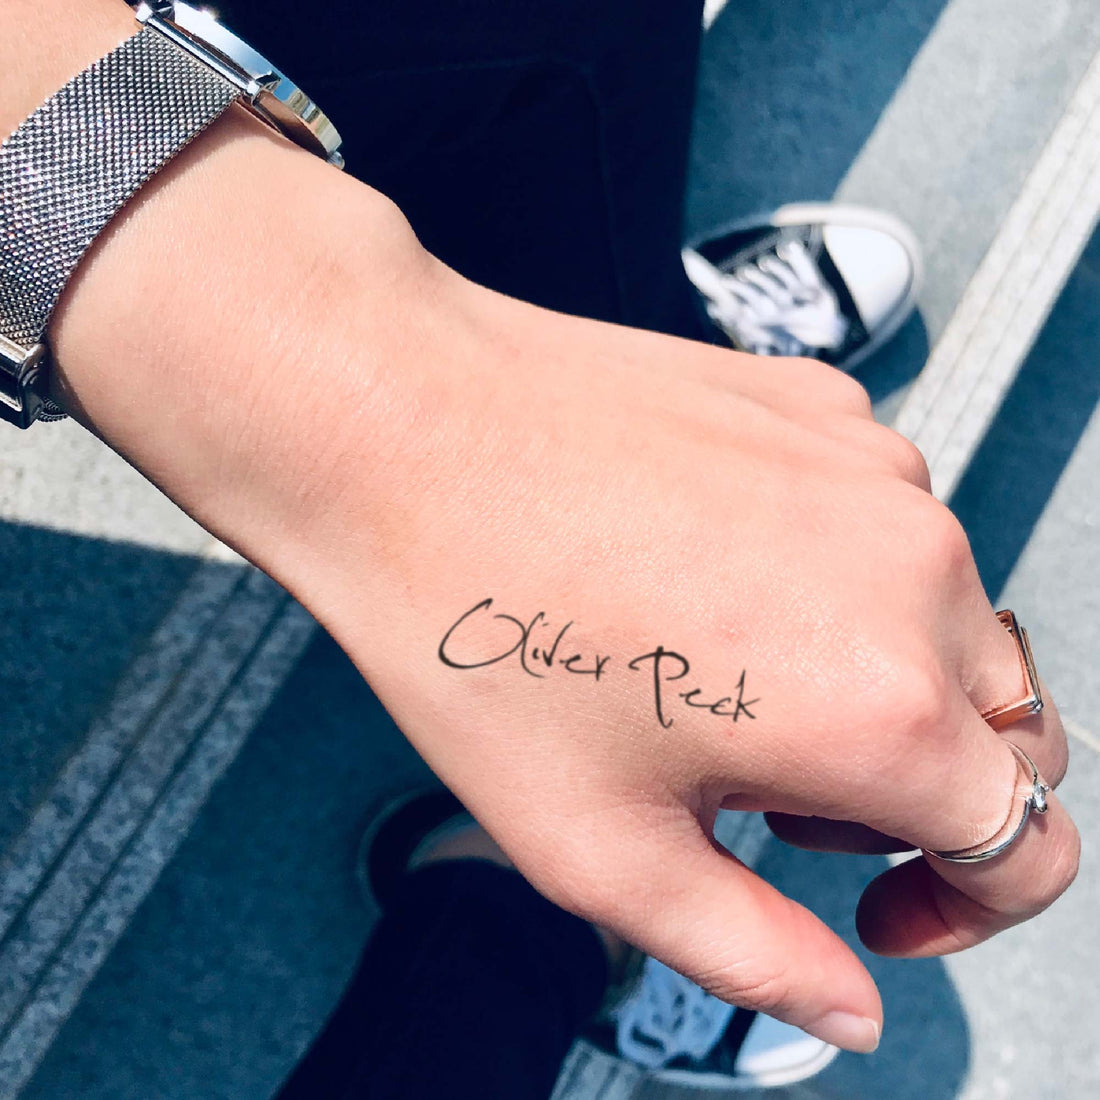 Oliver Peck custom temporary tattoo sticker design idea inspiration meanings removal arm wrist hand words font name signature calligraphy lyrics tour concert outfits merch accessory gift souvenir costumes wear dress up code